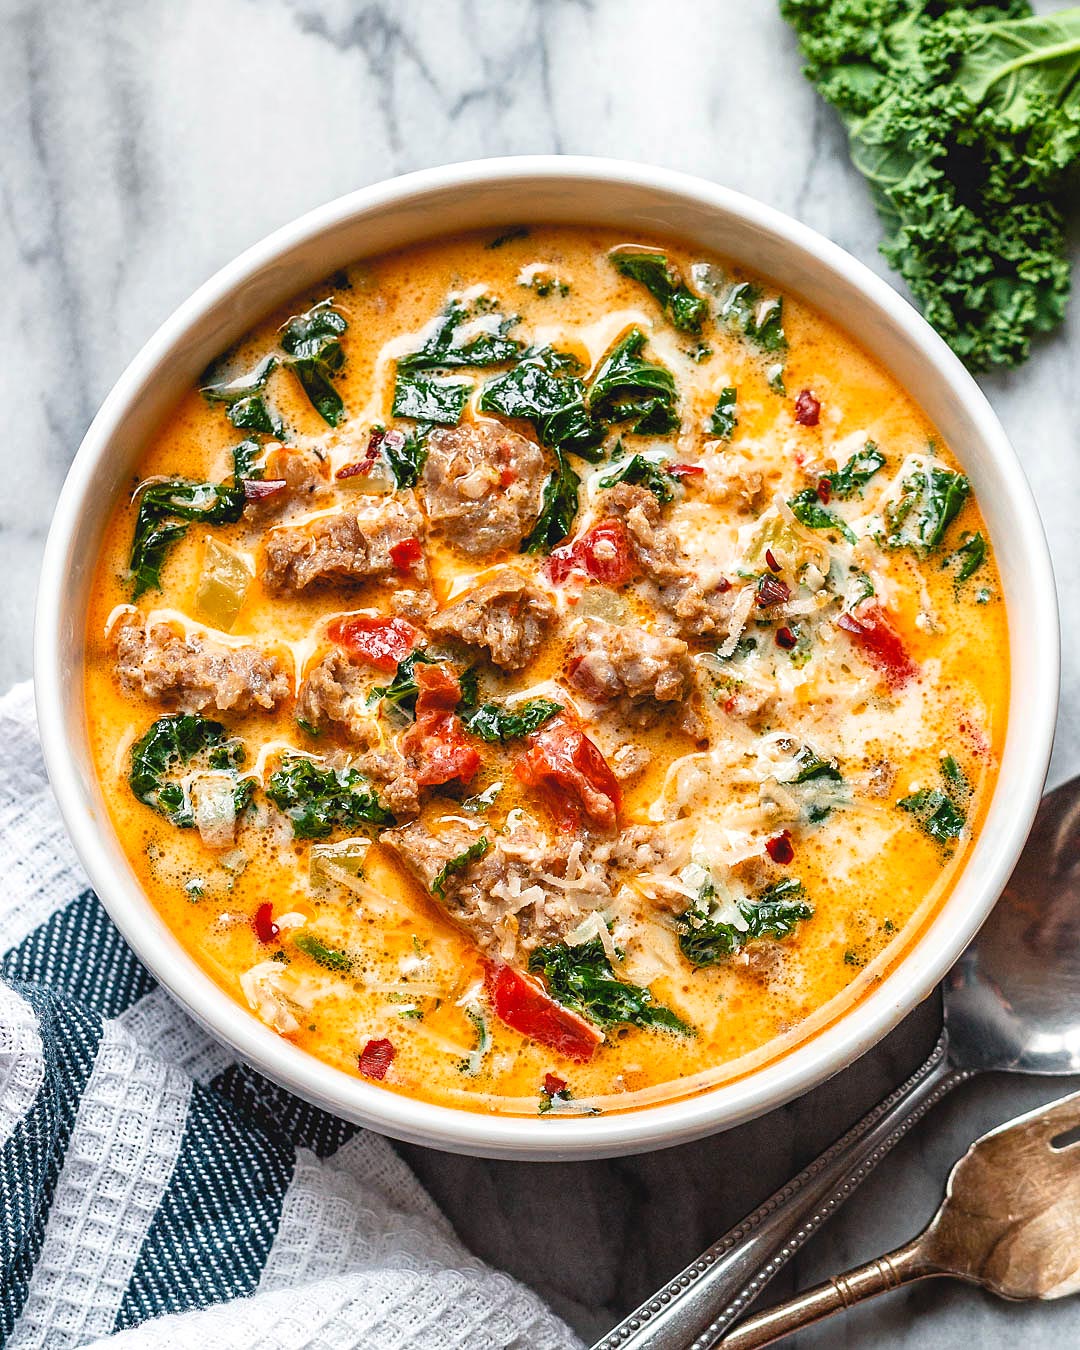 25 Lazy Day Meals That Start With Condensed Canned Soup • Bake Me Some Sugar